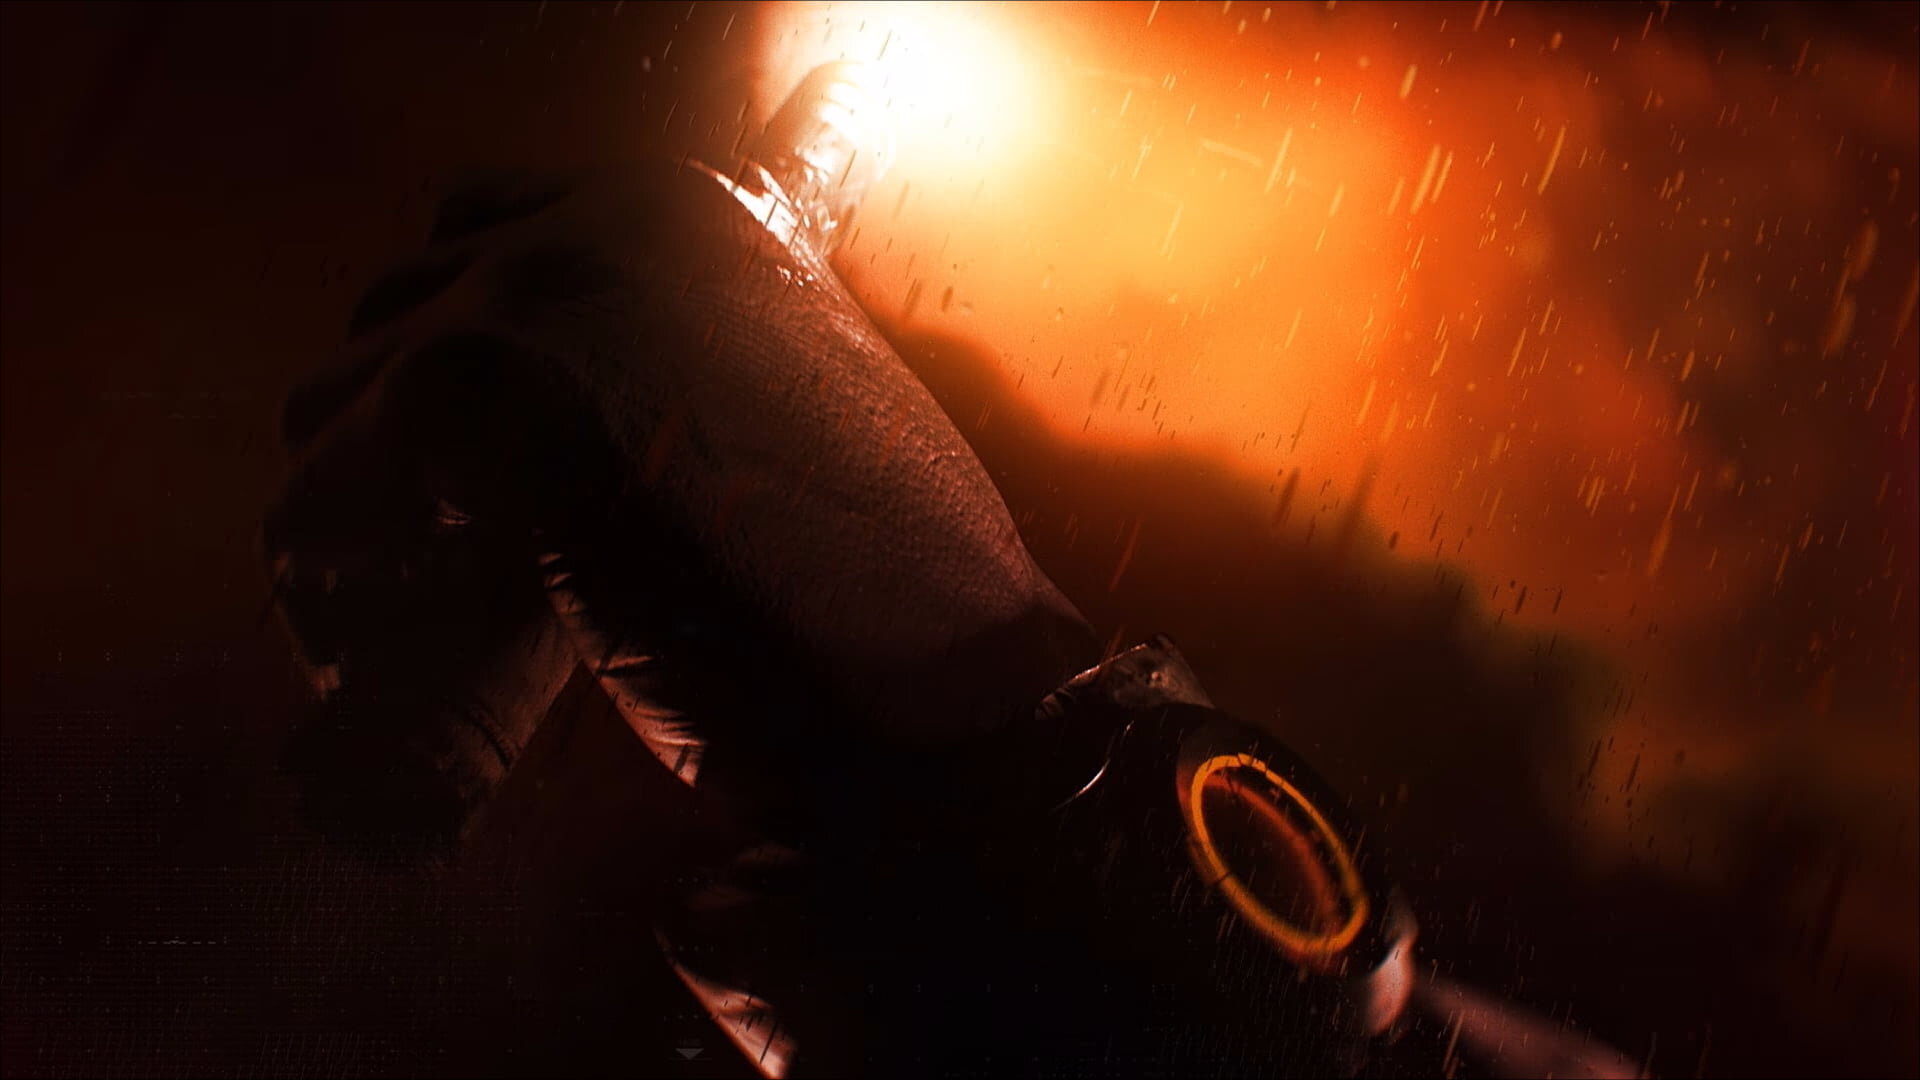 video-game-tom-clancy-s-the-division-2-smoke-hd-wallpaper-79d0689d711aedcb462708bf00b1160d.jpg